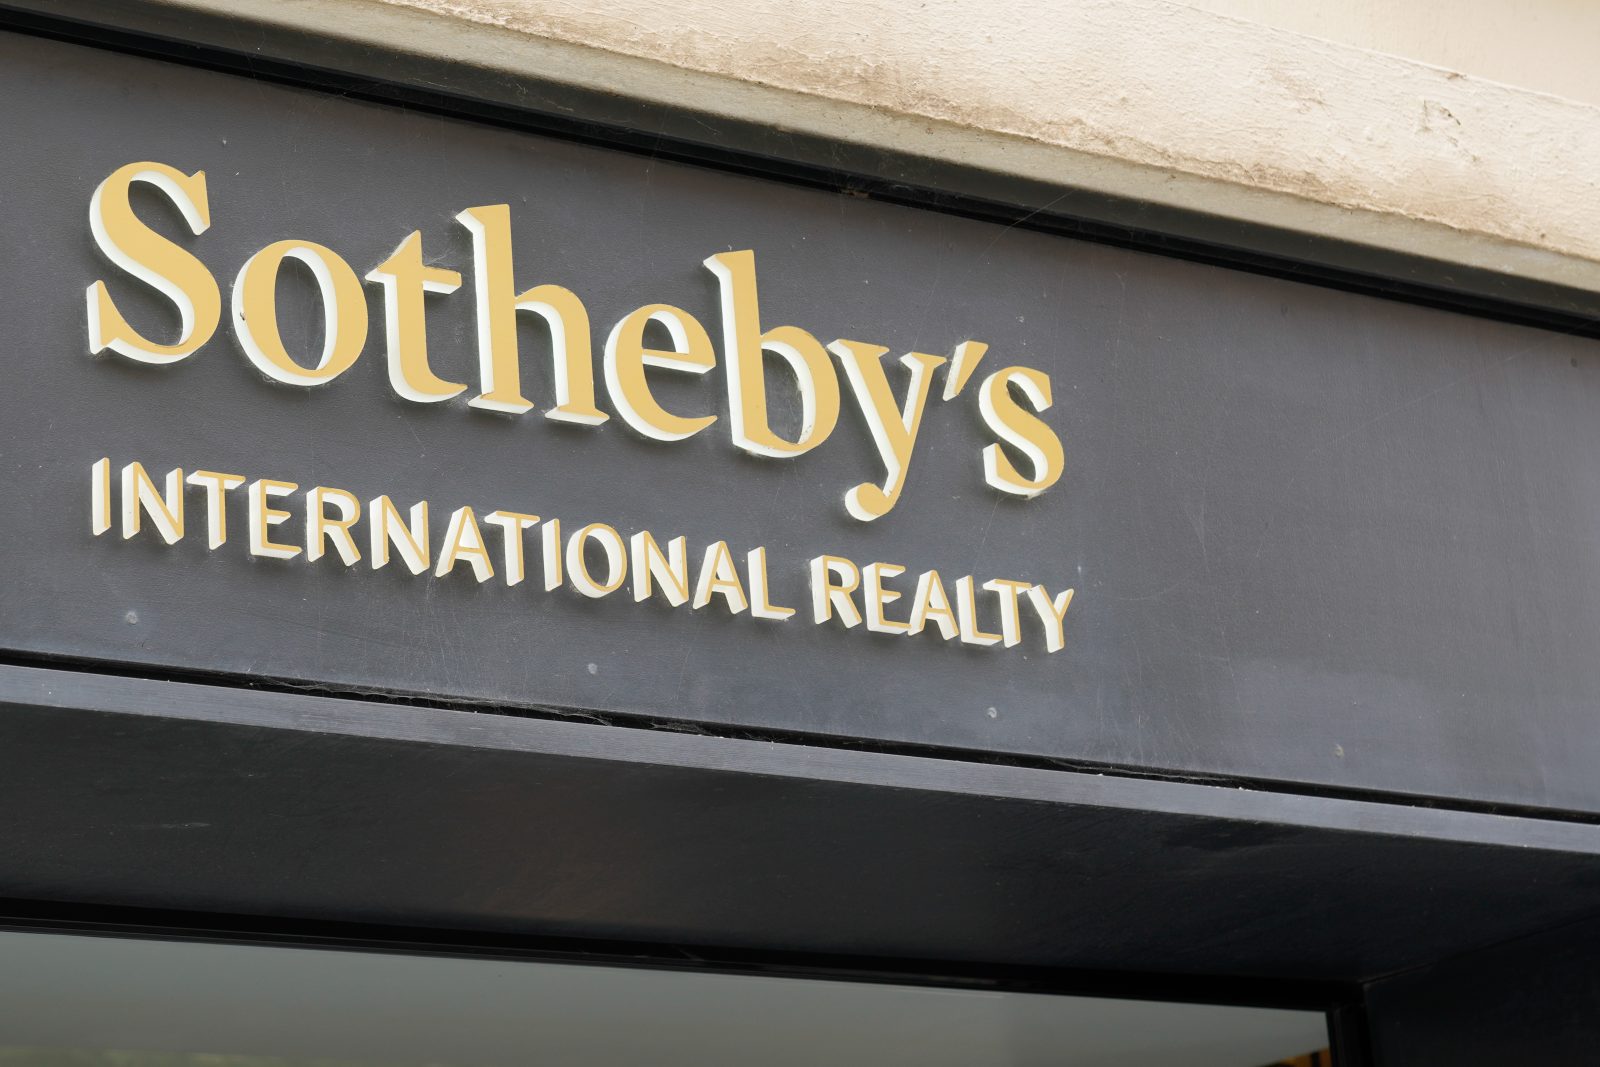 Biarritz , Aquitaine / France - 09 25 2020 : Sotheby logo and sign luxury brokers specialized in realty and auctions real estate text